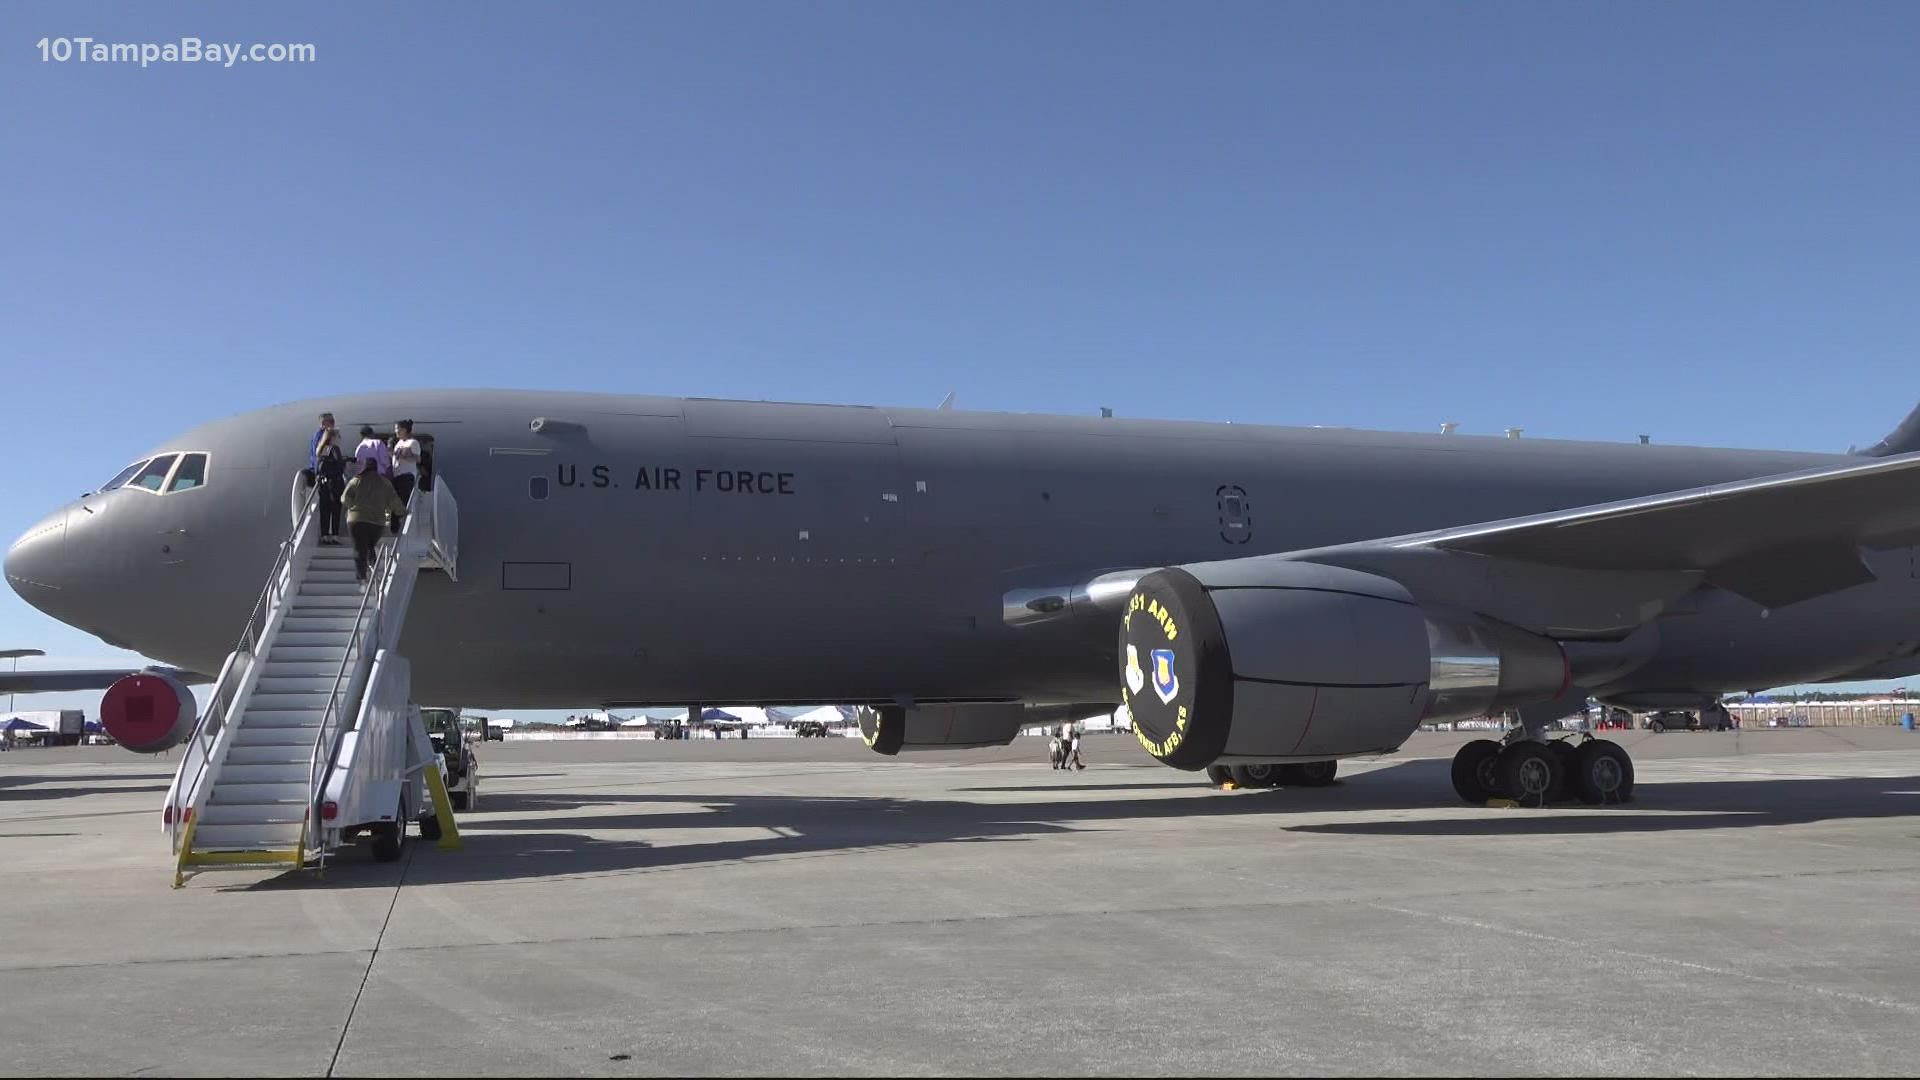 The KC-46 allows for more fueling and cargo and has better medical capabilities.